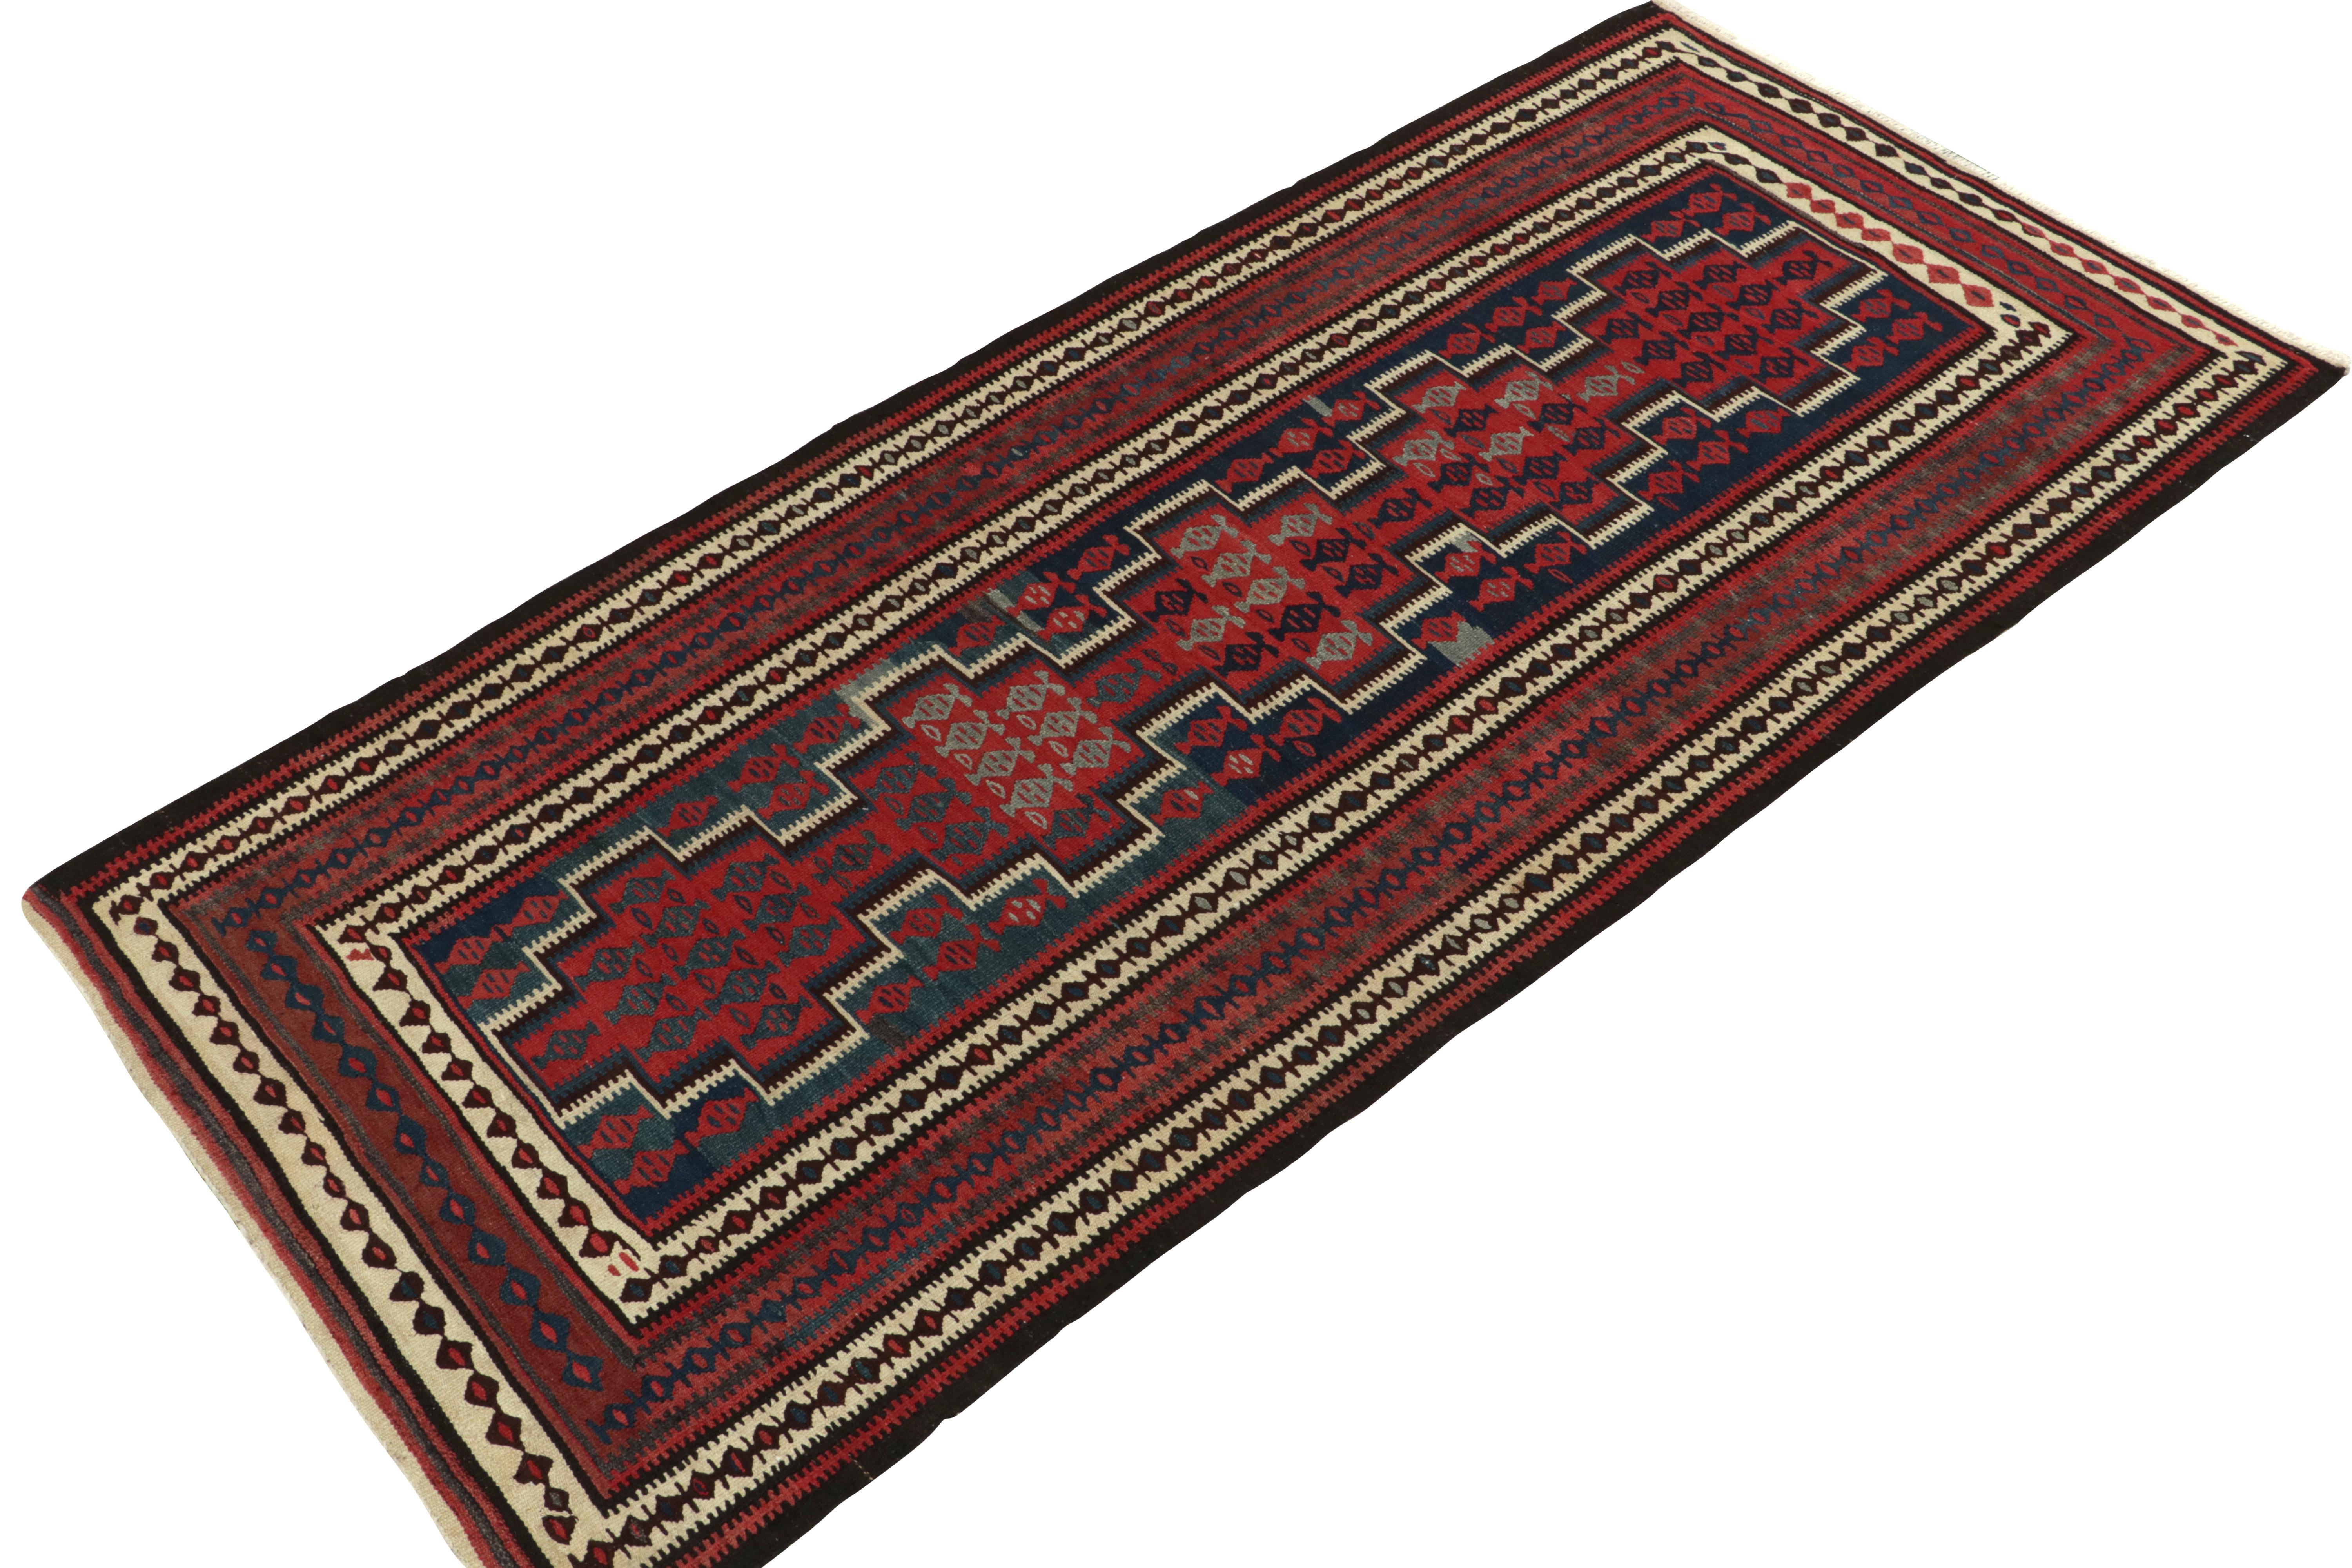 Originating from Turkey circa 1950-1960, a mid-century kilim rug enjoying a meticulous all over pattern. Featuring a well defined traditional pattern in red, blue & beige-brown with outstanding finesse, a 4x9 piece thriving in good condition well